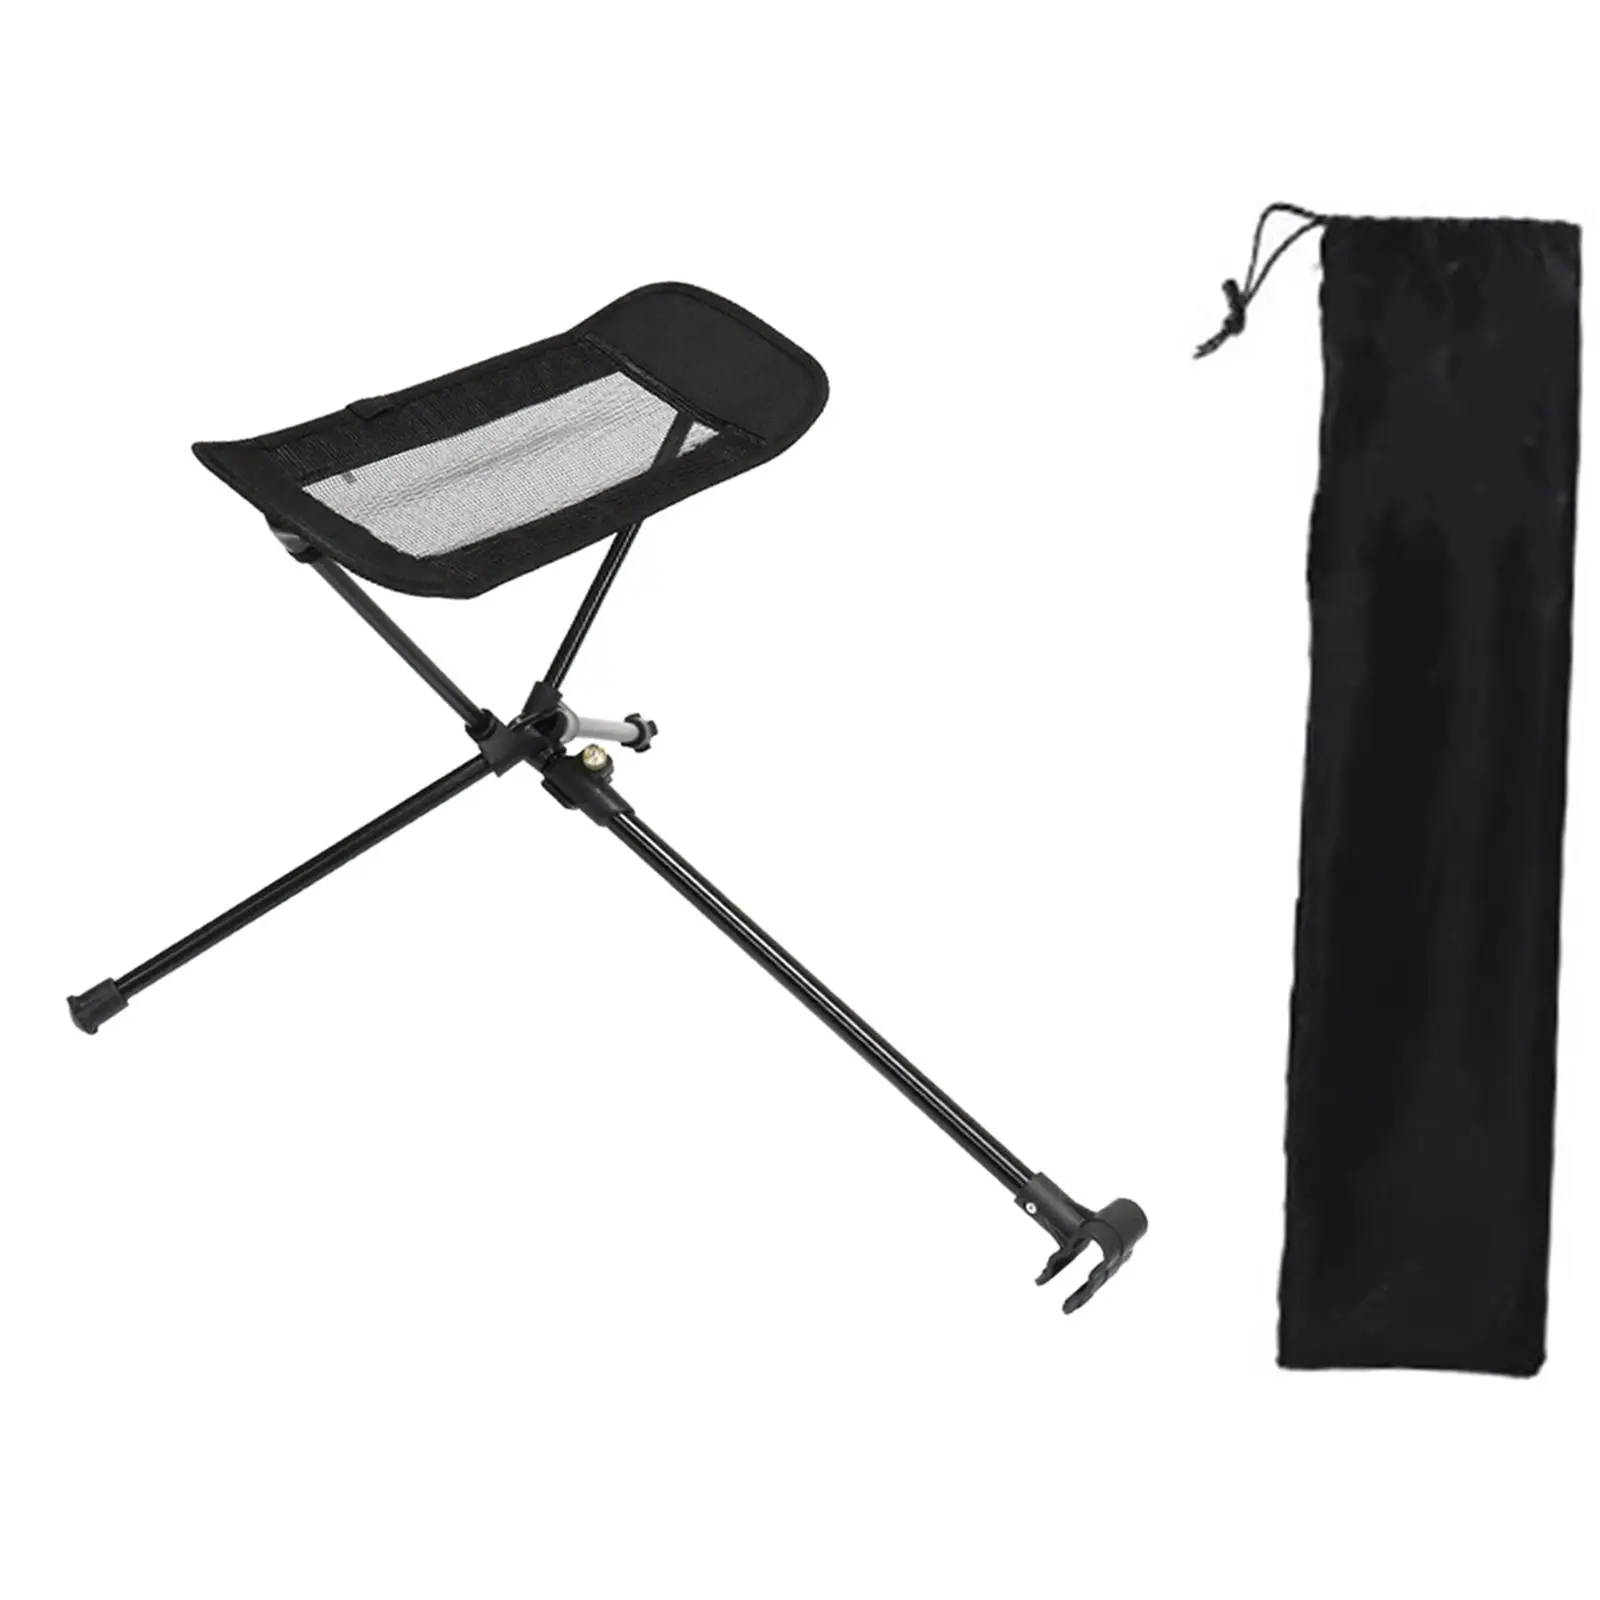 Folding Chair Footrest Retractable Adjustable Foot Stool for Picnic Camping Outdoor